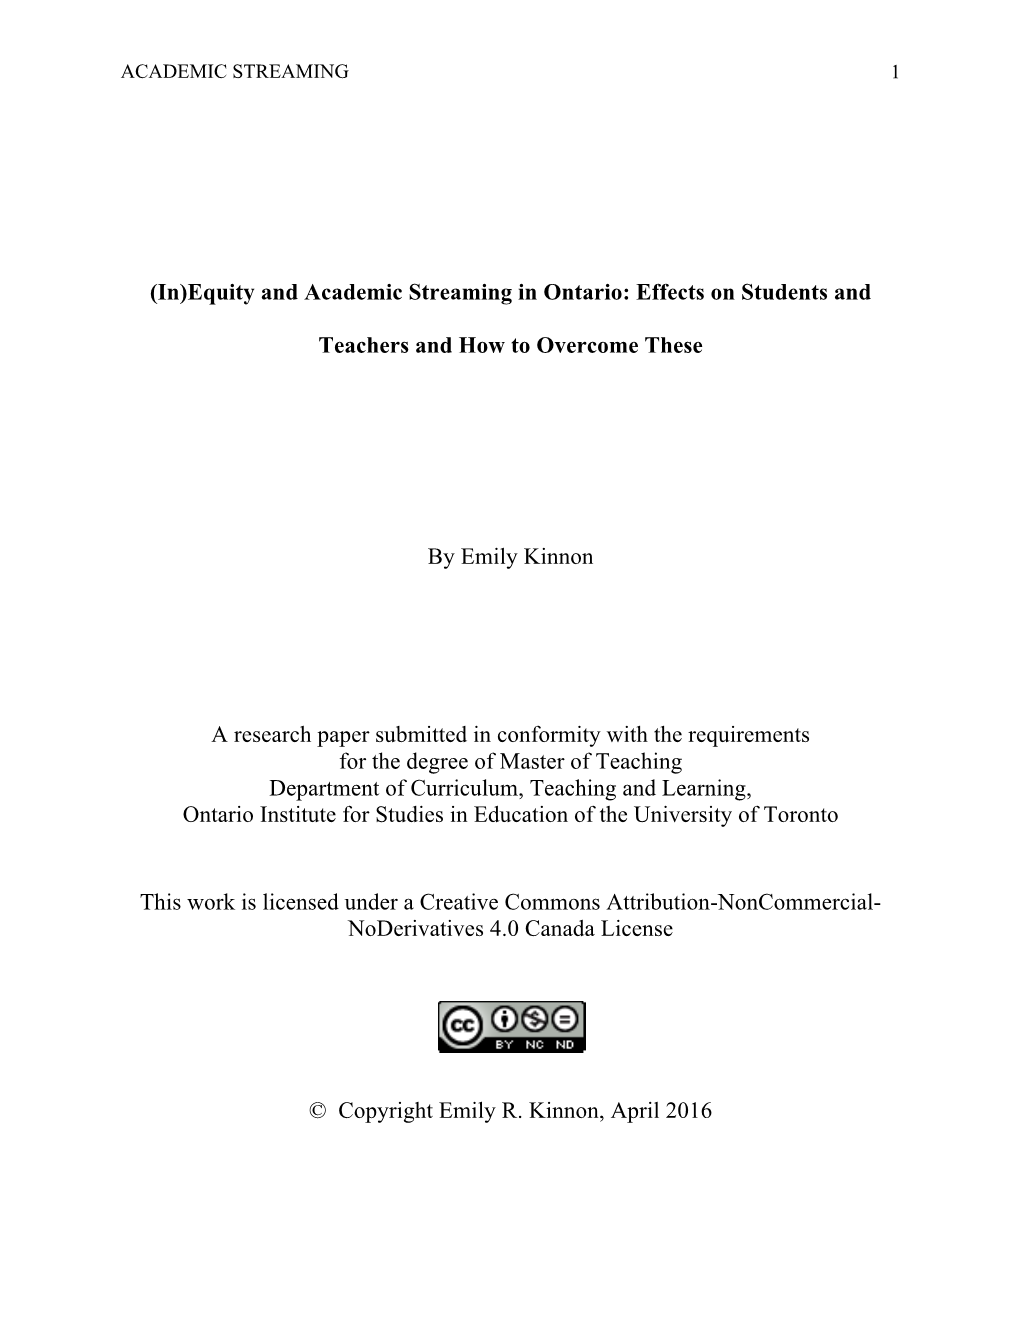 (In)Equity and Academic Streaming in Ontario: Effects on Students And